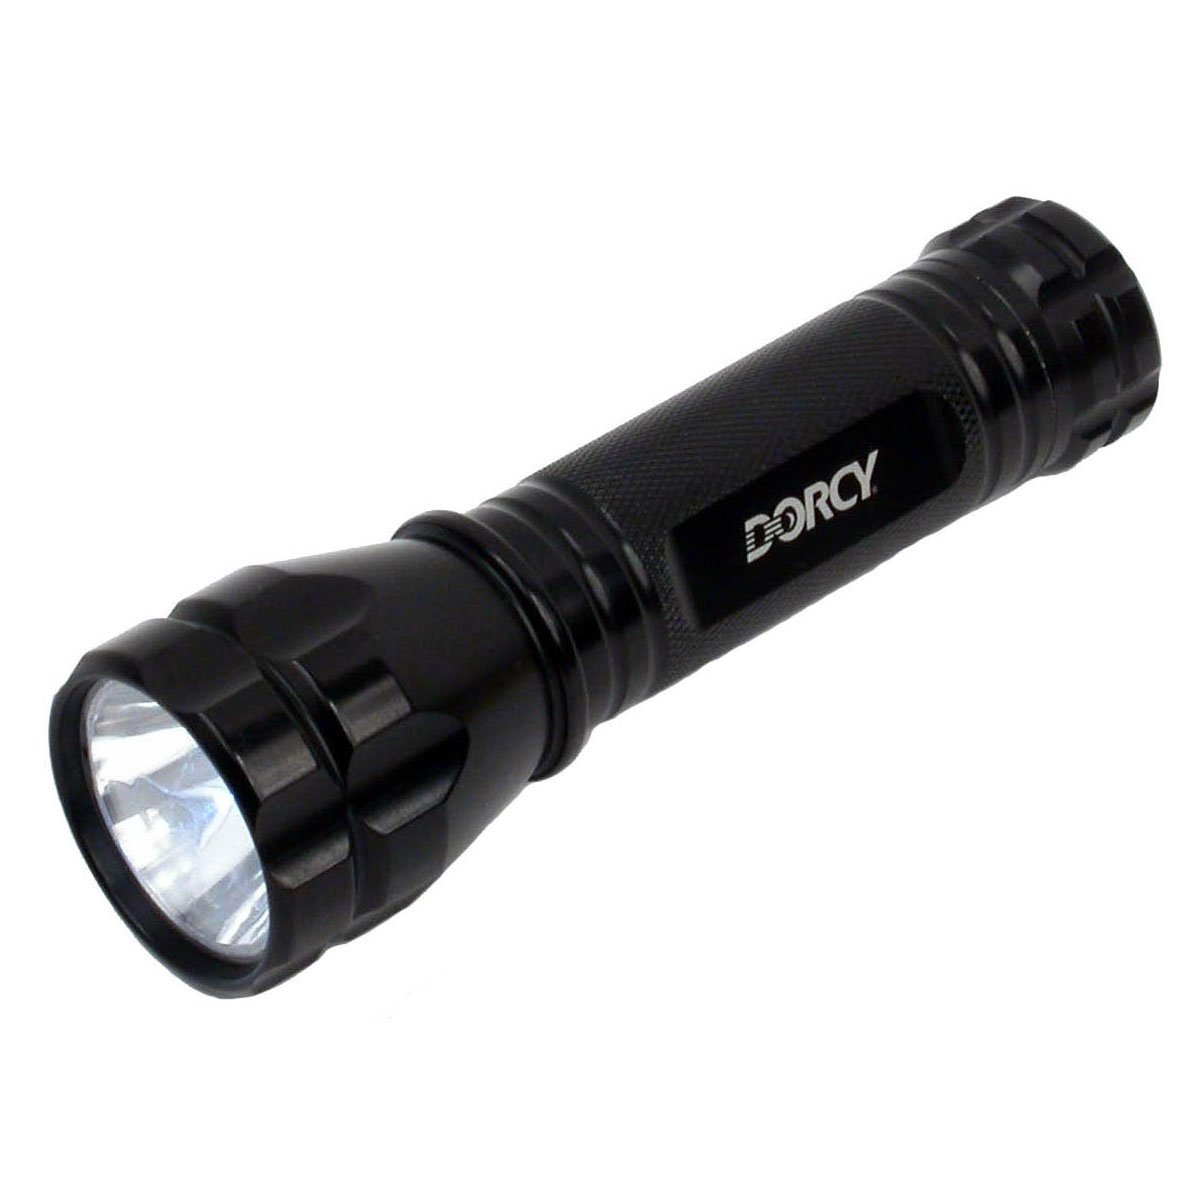 buy led flashlights at cheap rate in bulk. wholesale & retail electrical tools & kits store. home décor ideas, maintenance, repair replacement parts